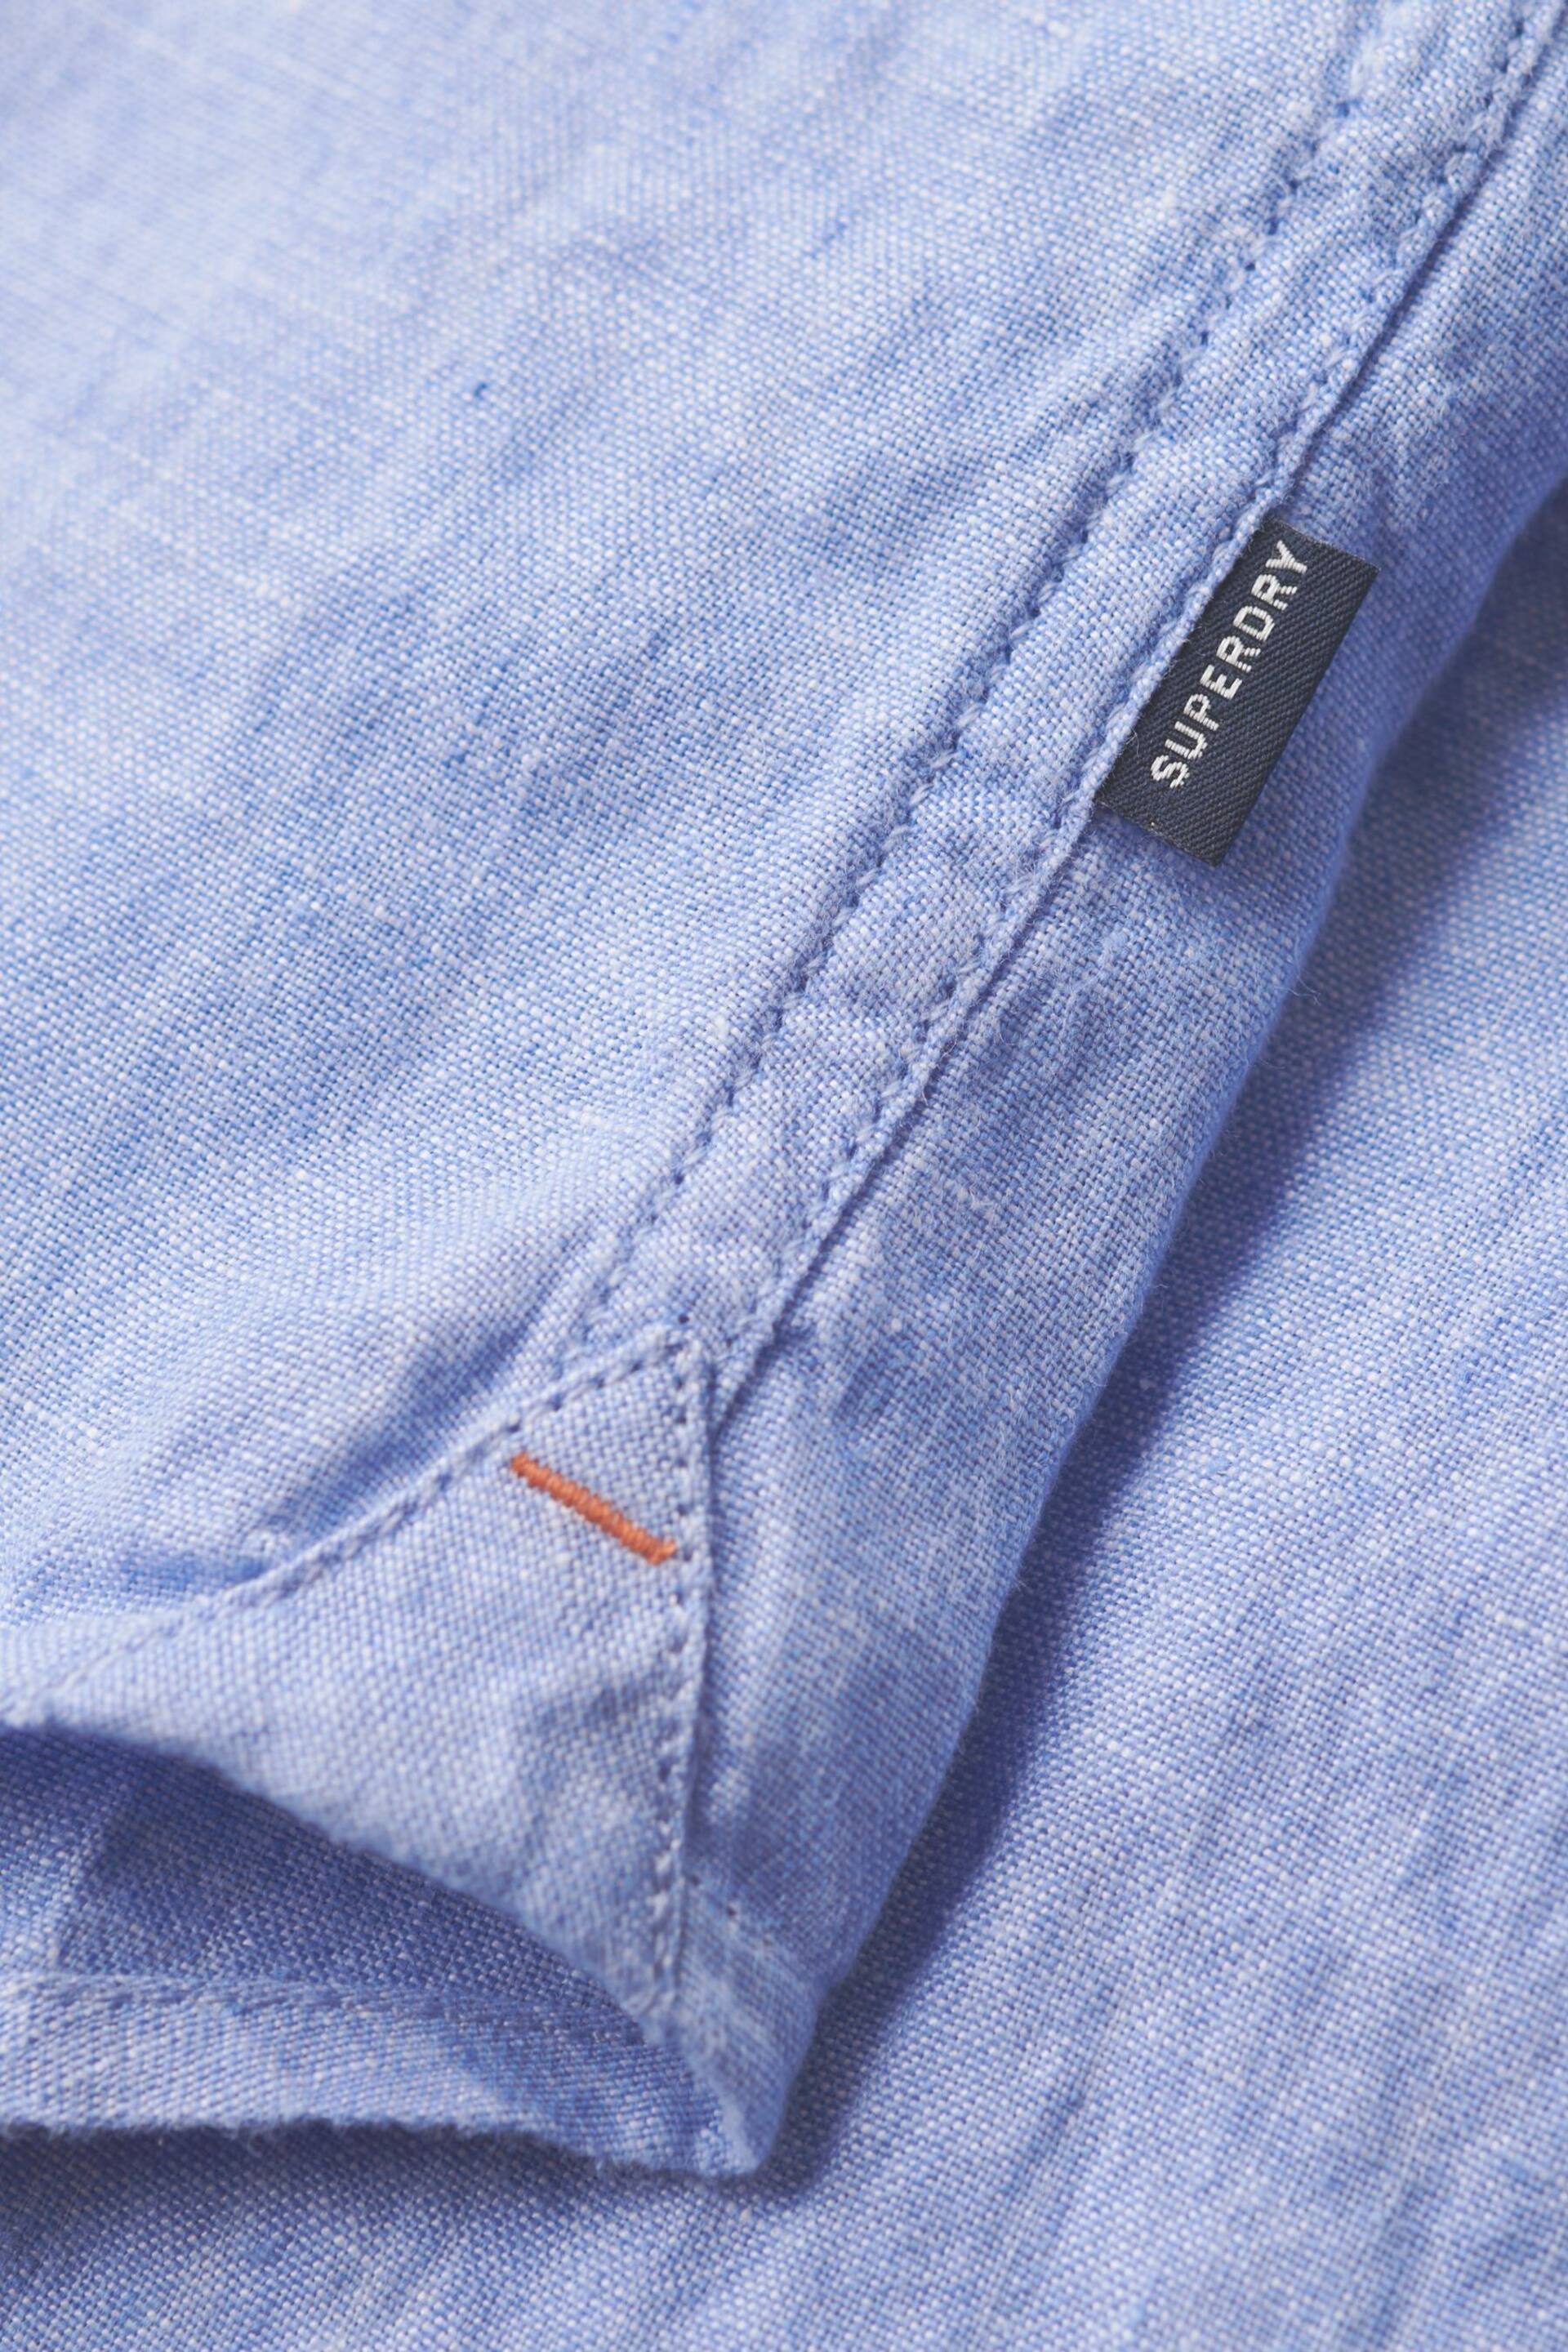 Superdry Blue Studios Casual Linen Long Sleeved Shirt - Image 6 of 6